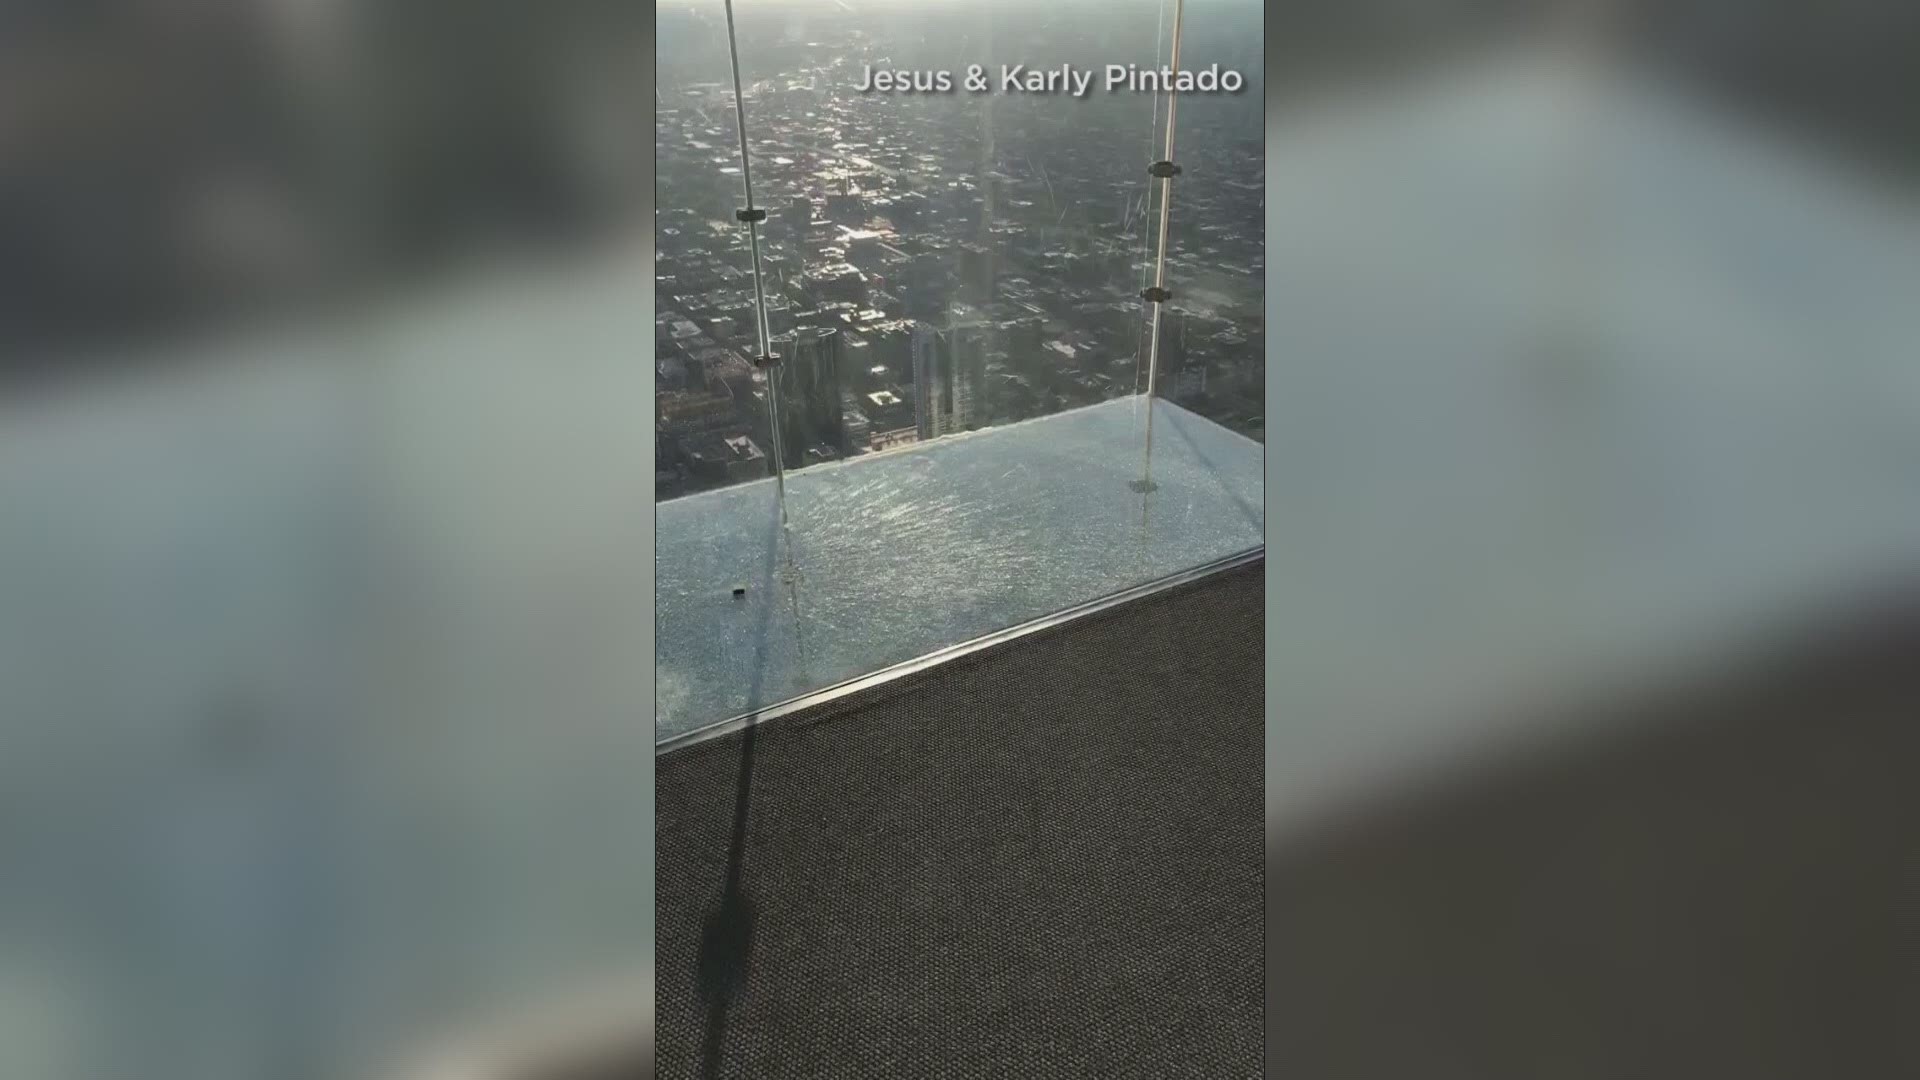 A glass observation deck on a Chicago high-rise cracked under guests' feet, causing a scare Monday.

CBS reports the shattered protective glass layer covers the glass bottom of the deck on the 103rd floor of the Willis Tower.

A witness said a woman and two kids were on the deck when the glass broke.